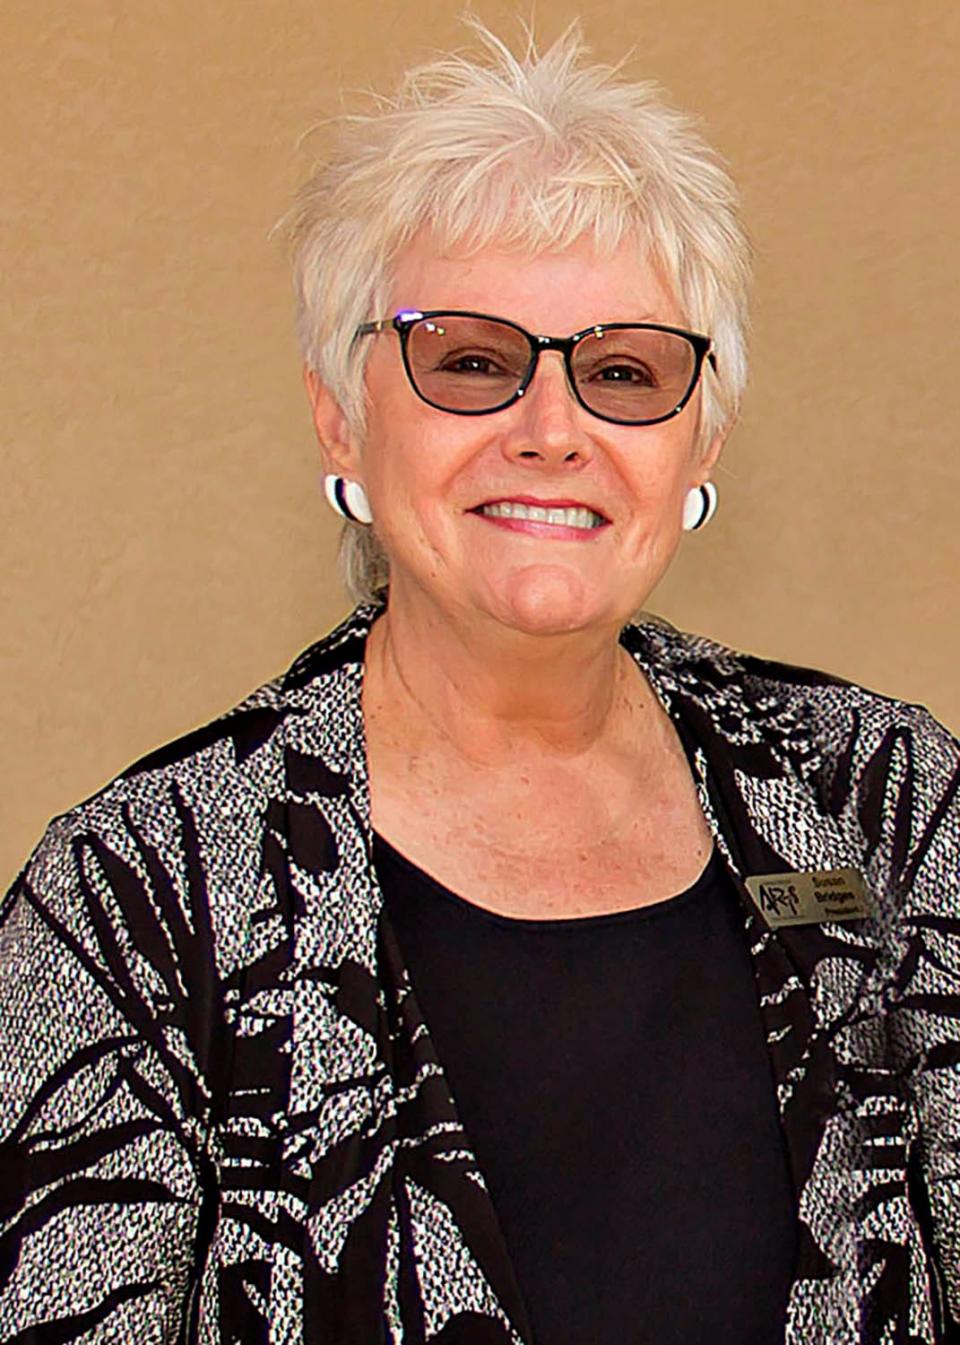 Susan Bridges has been president and CEO of Center for the Arts Bonita Springs since May 1999. She just retired after more than 23 years at the helm.